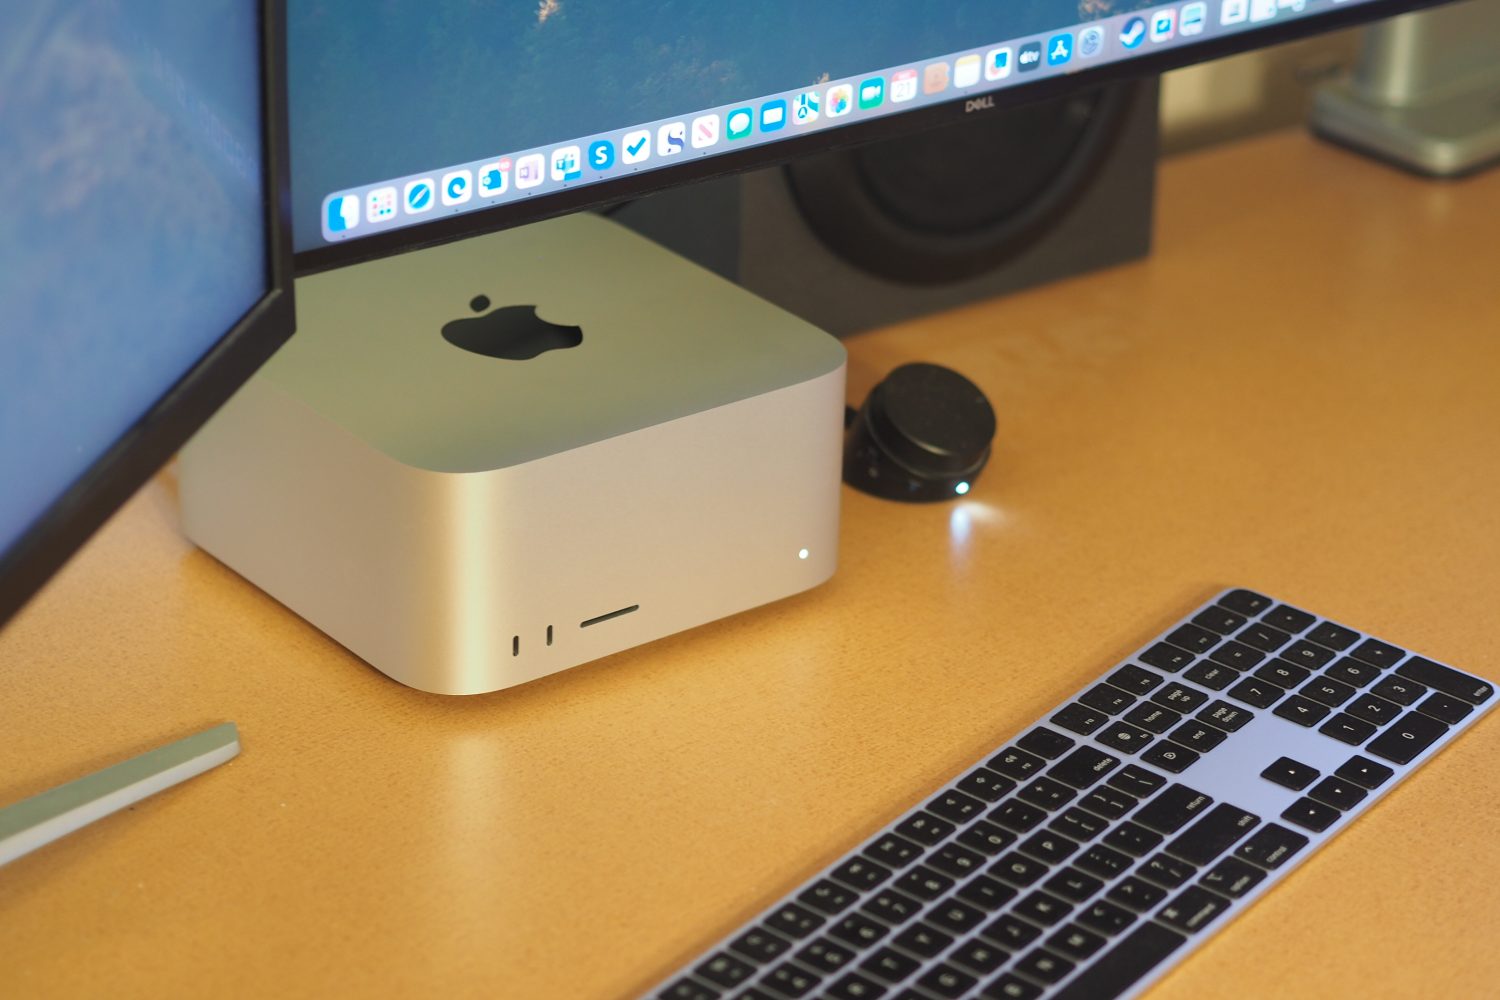 How to Get Spotify on a MacBook, Mac Mini, or iMac